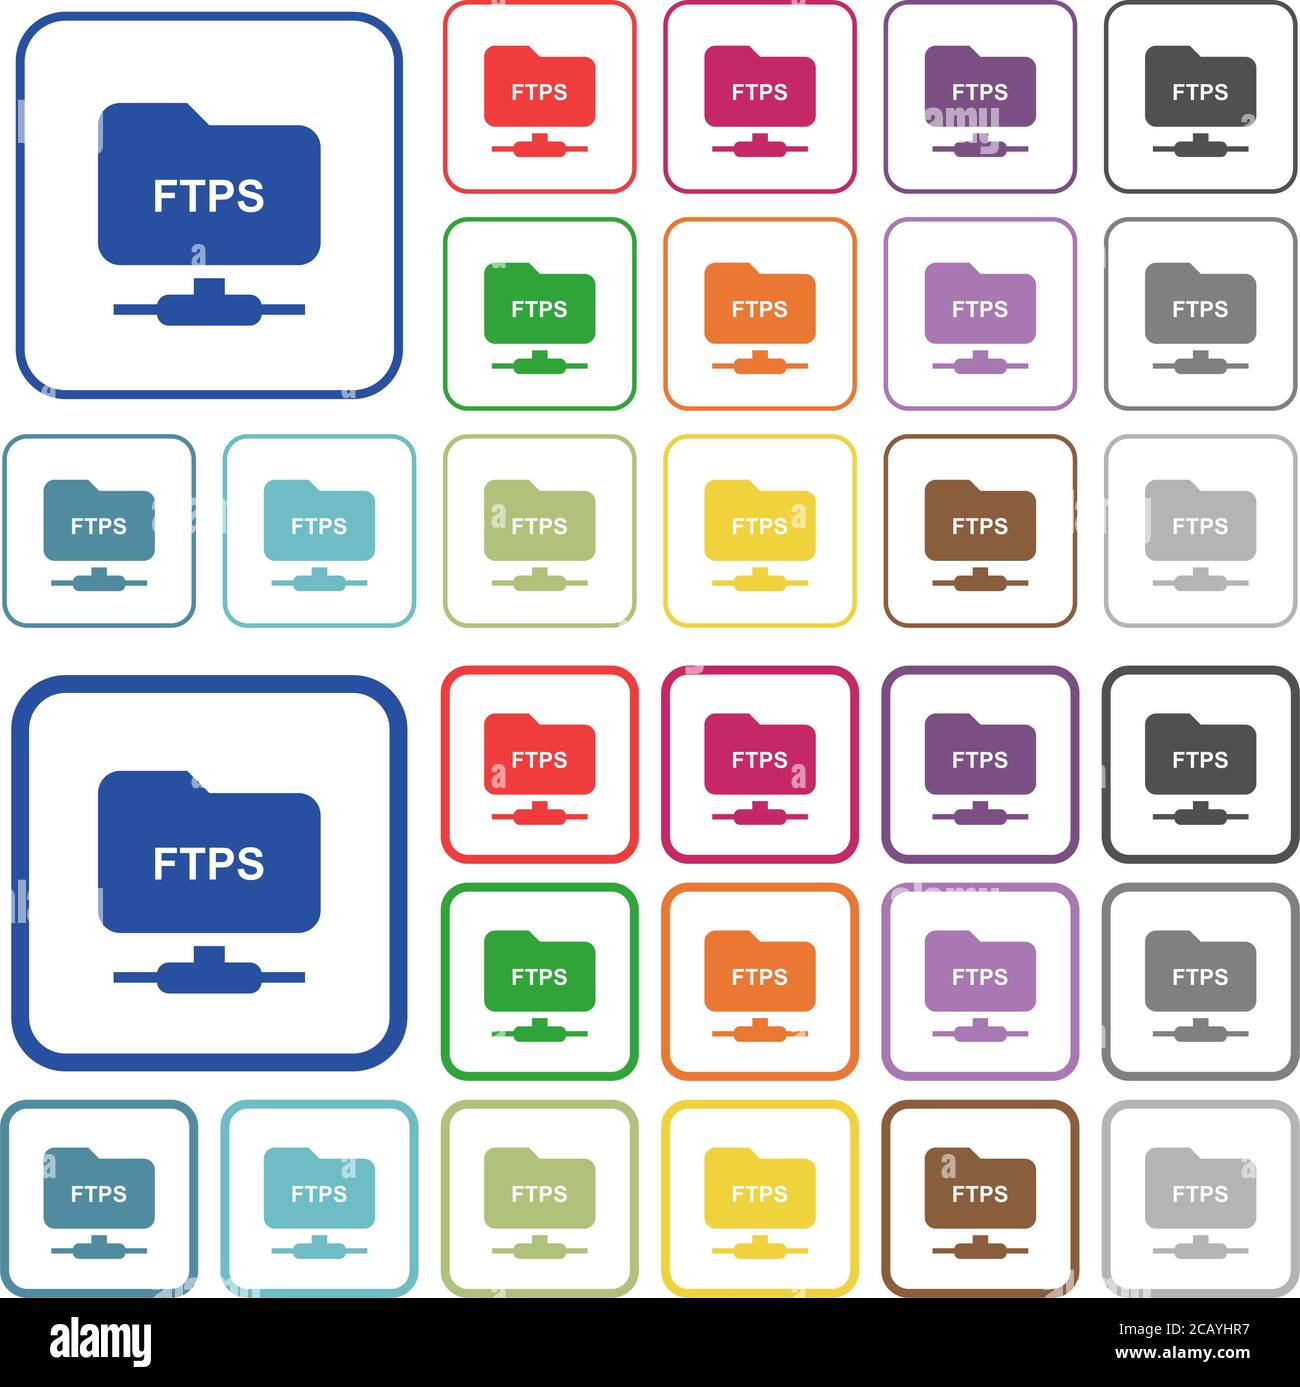 FTP over ssl color flat icons in rounded square frames. Thin and thick versions included. Stock Vector